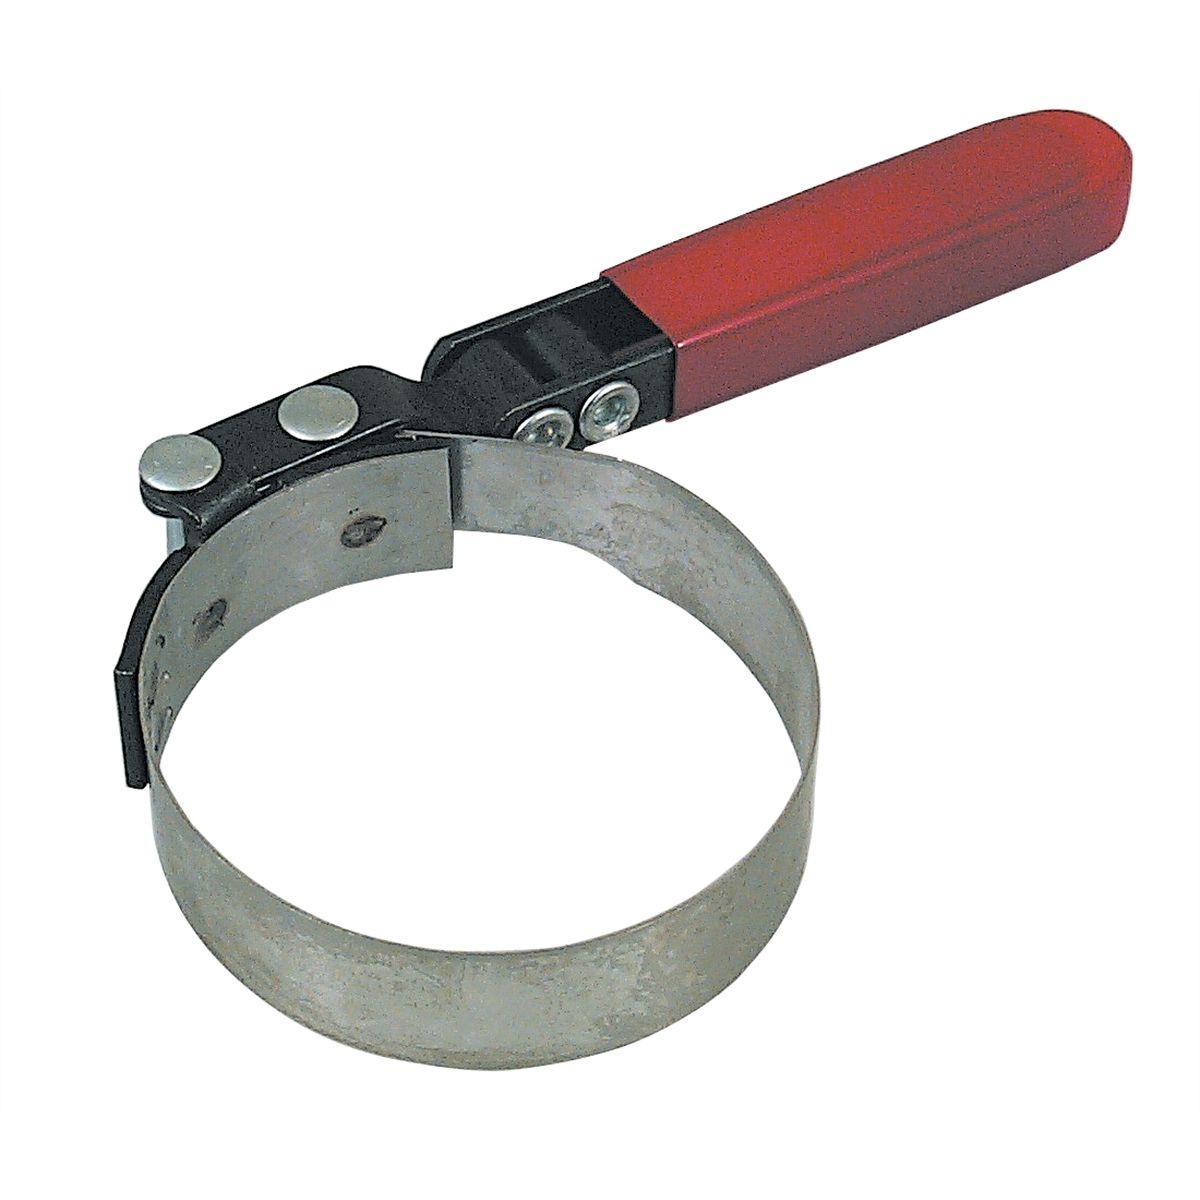 Standard Swivel Grip Oil Filter Wrench 3-1/2 to 3-...